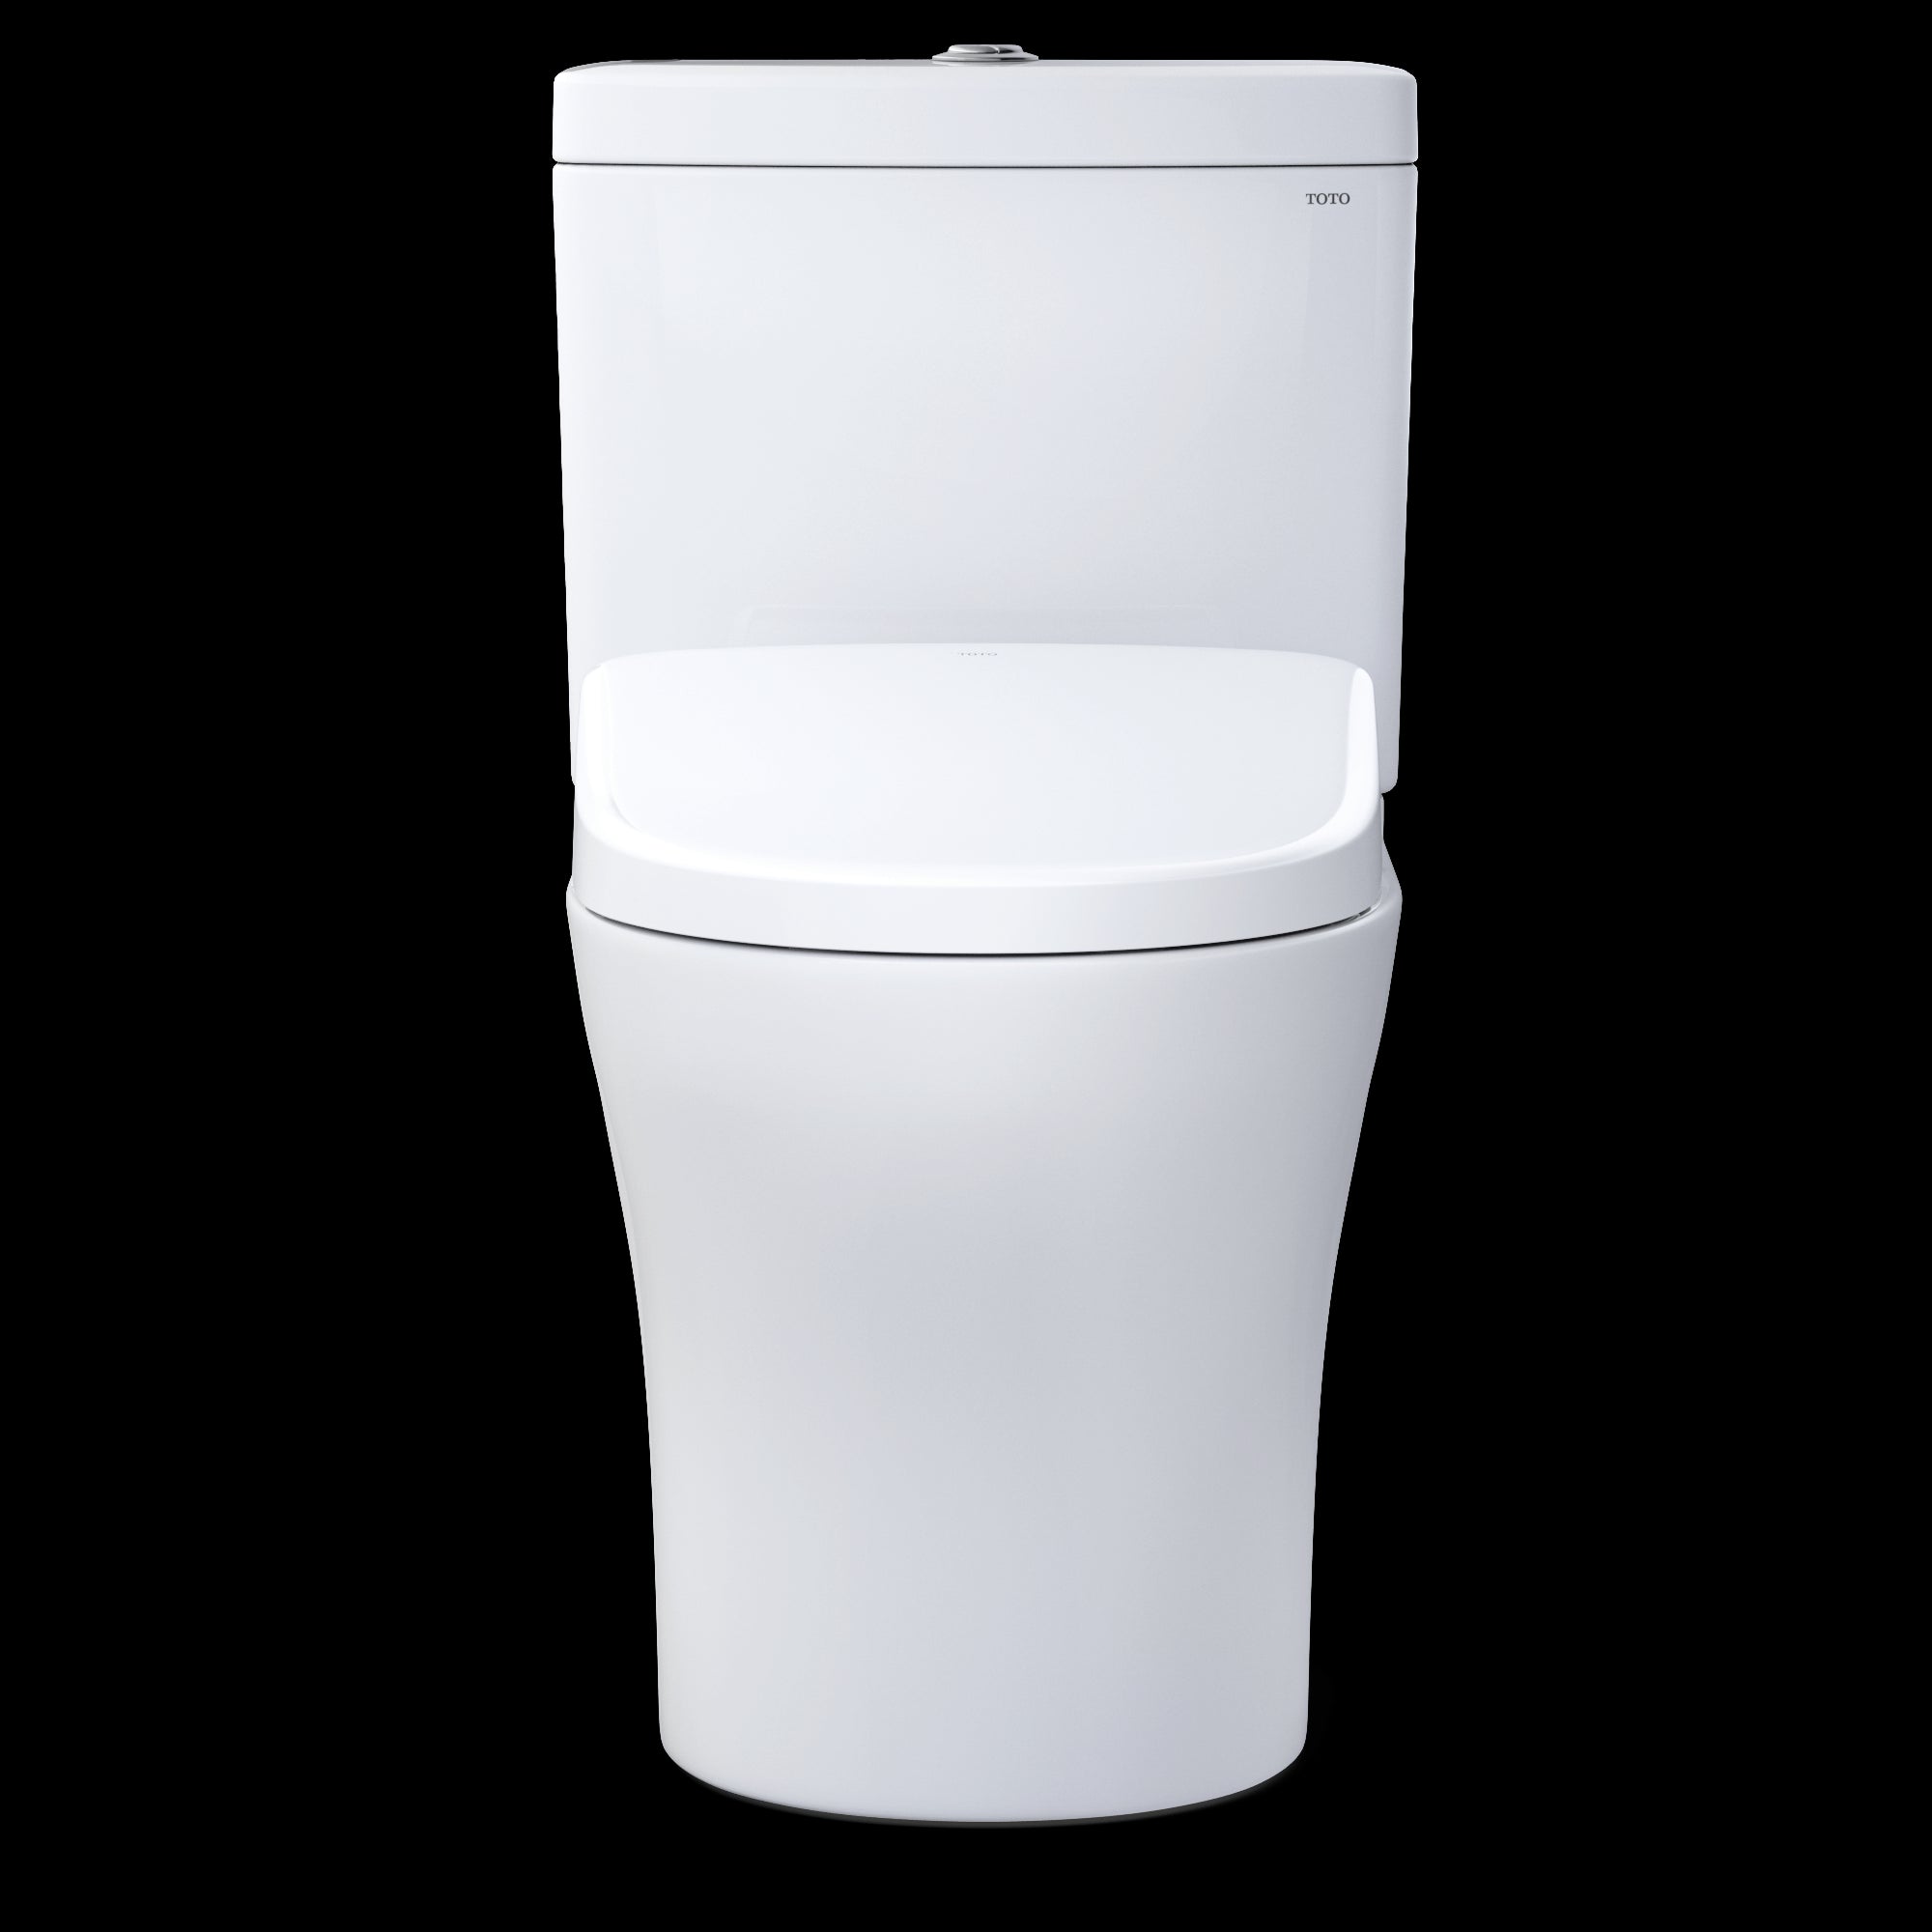 TOTO Aquia 1.28 and 0.9 GPF with S7 Contemporary Bidet Seat | MW4464726CEMFGN